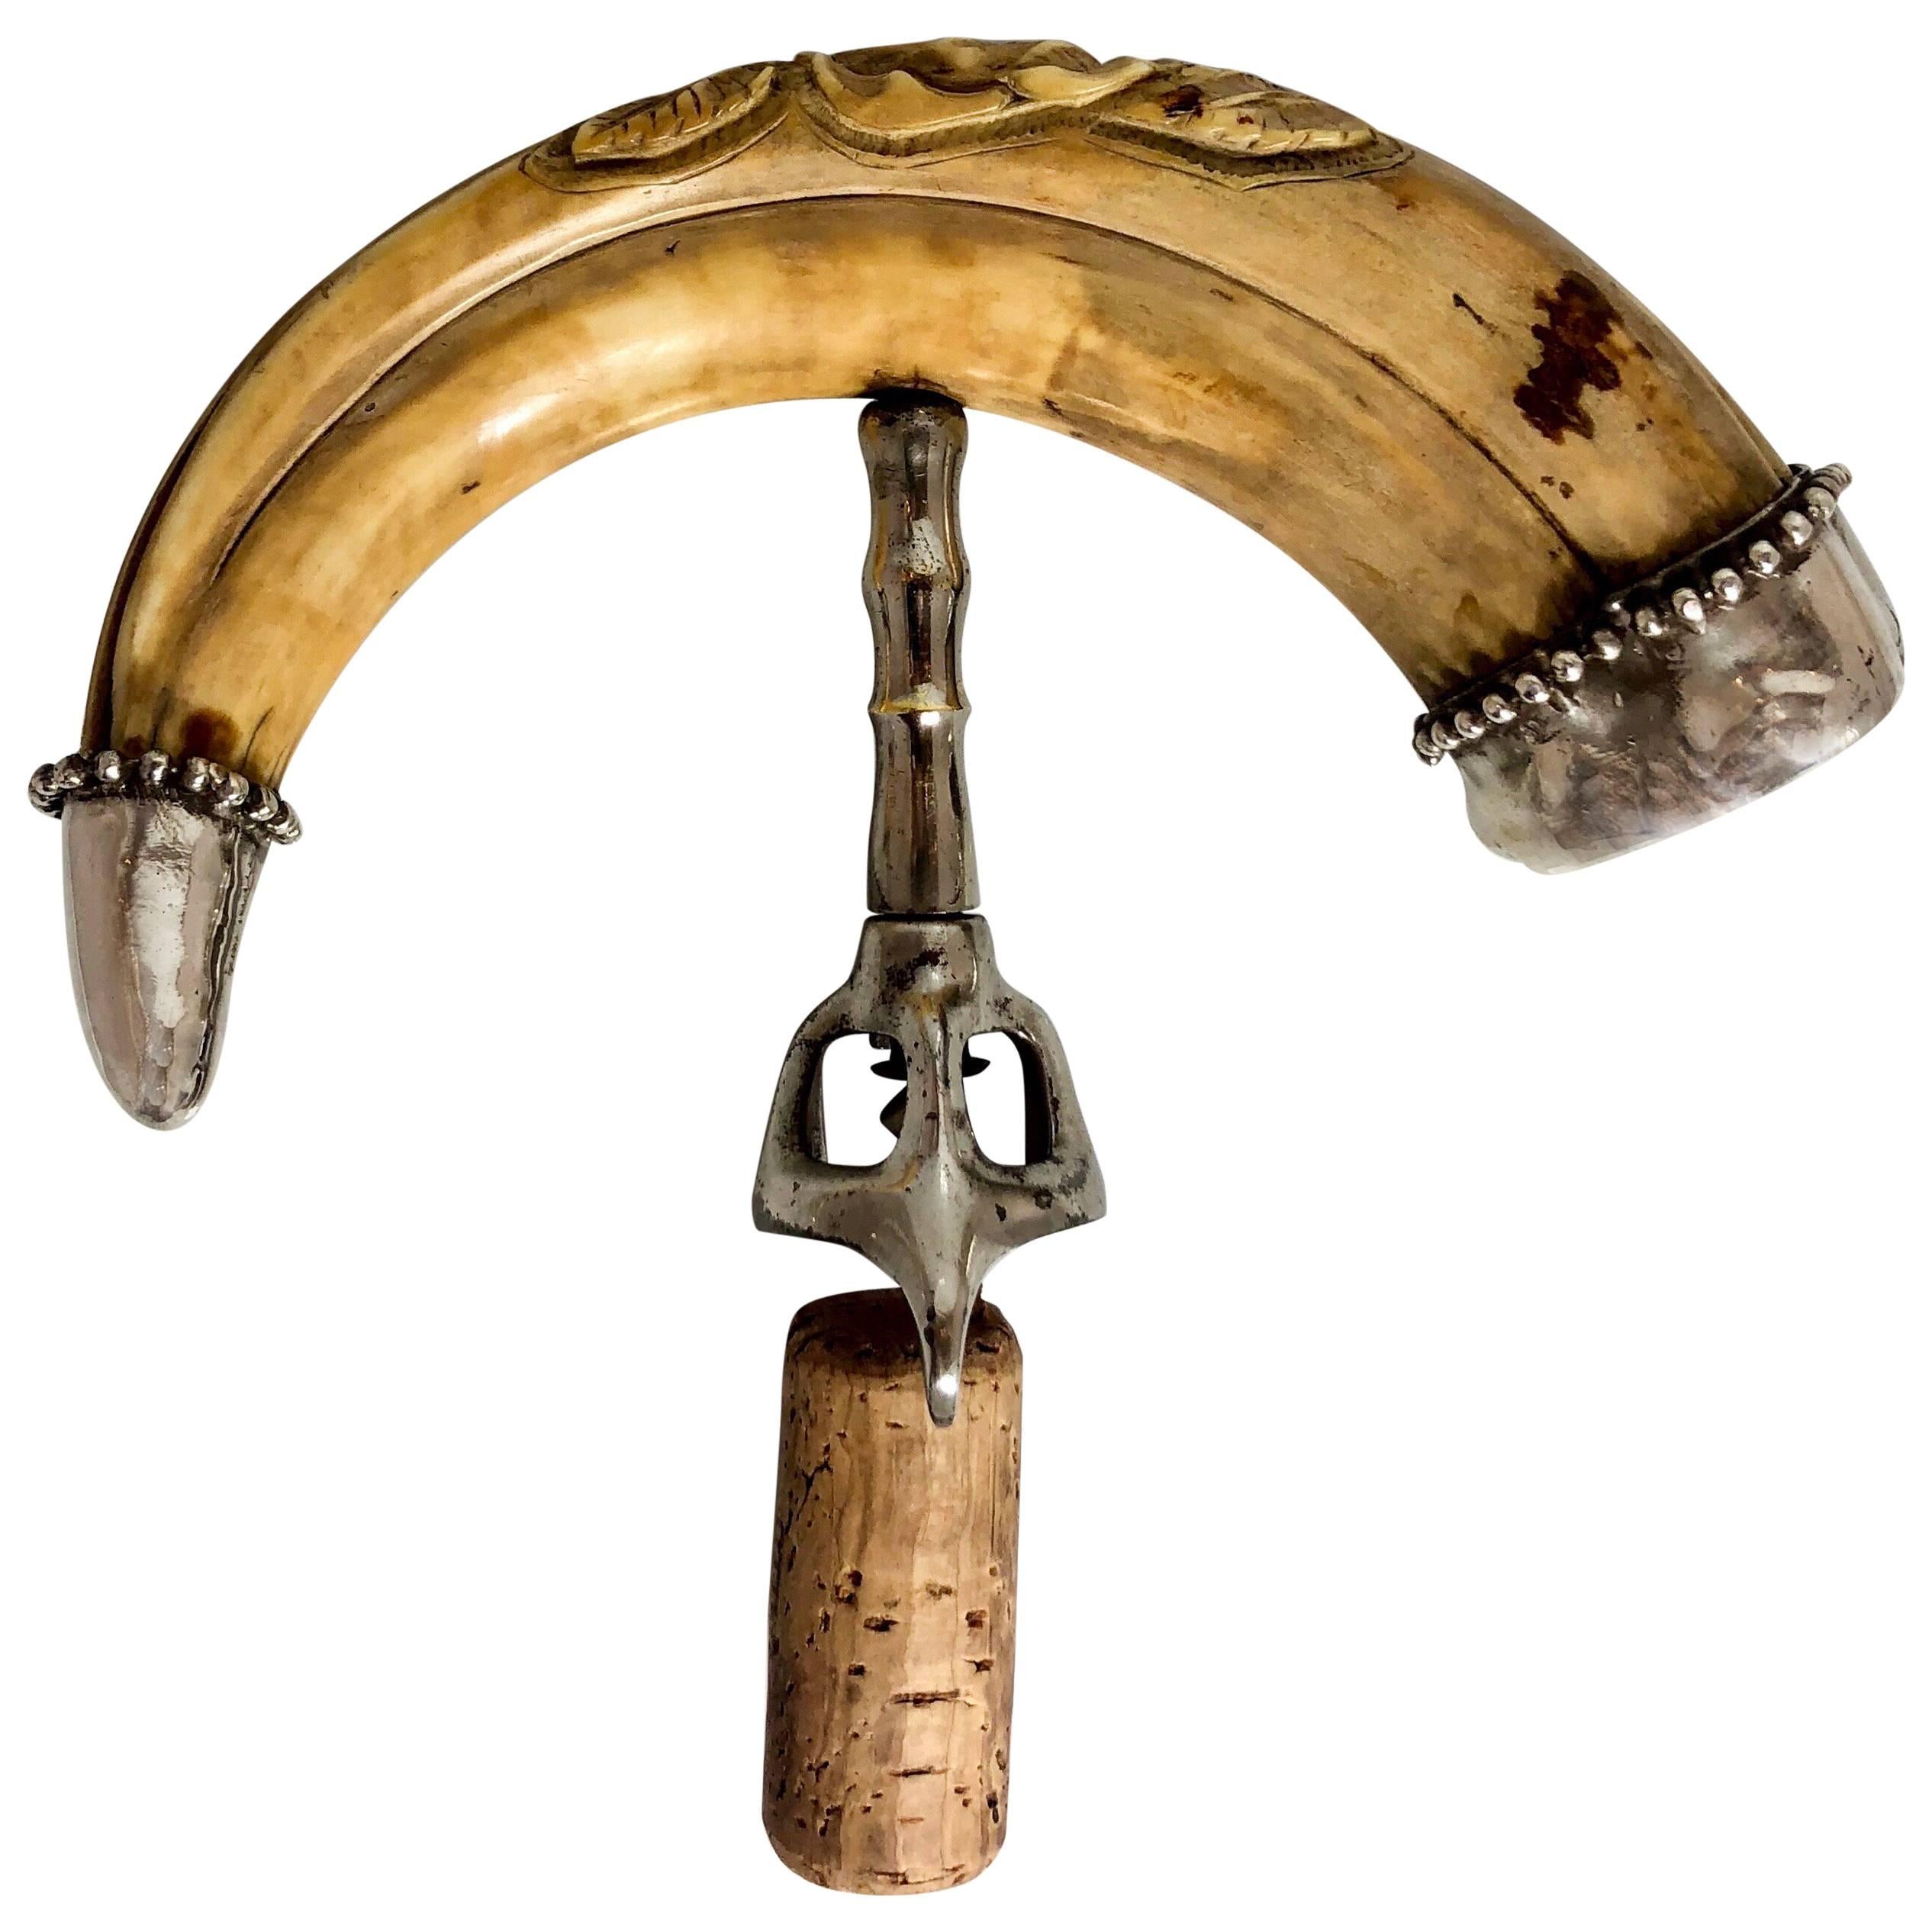 Antique Carved Boar Tusk Corkscrew with Sterling Silver Mounts, circa 1880-1890